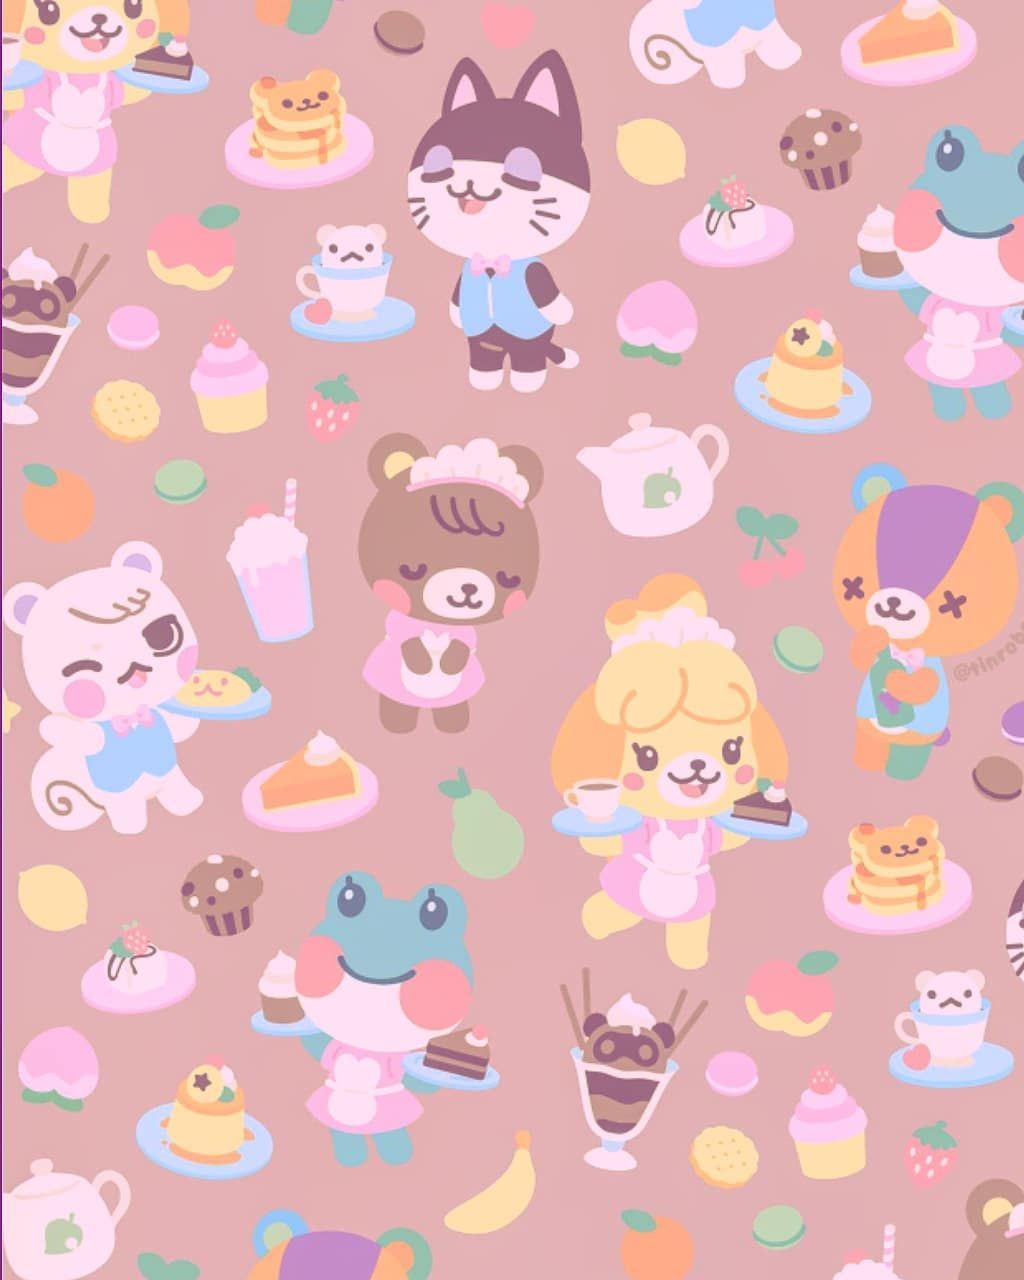 animal crossing collage wallpaper  Animal crossing Cyber y2k aesthetic  wallpaper Animal crossing characters